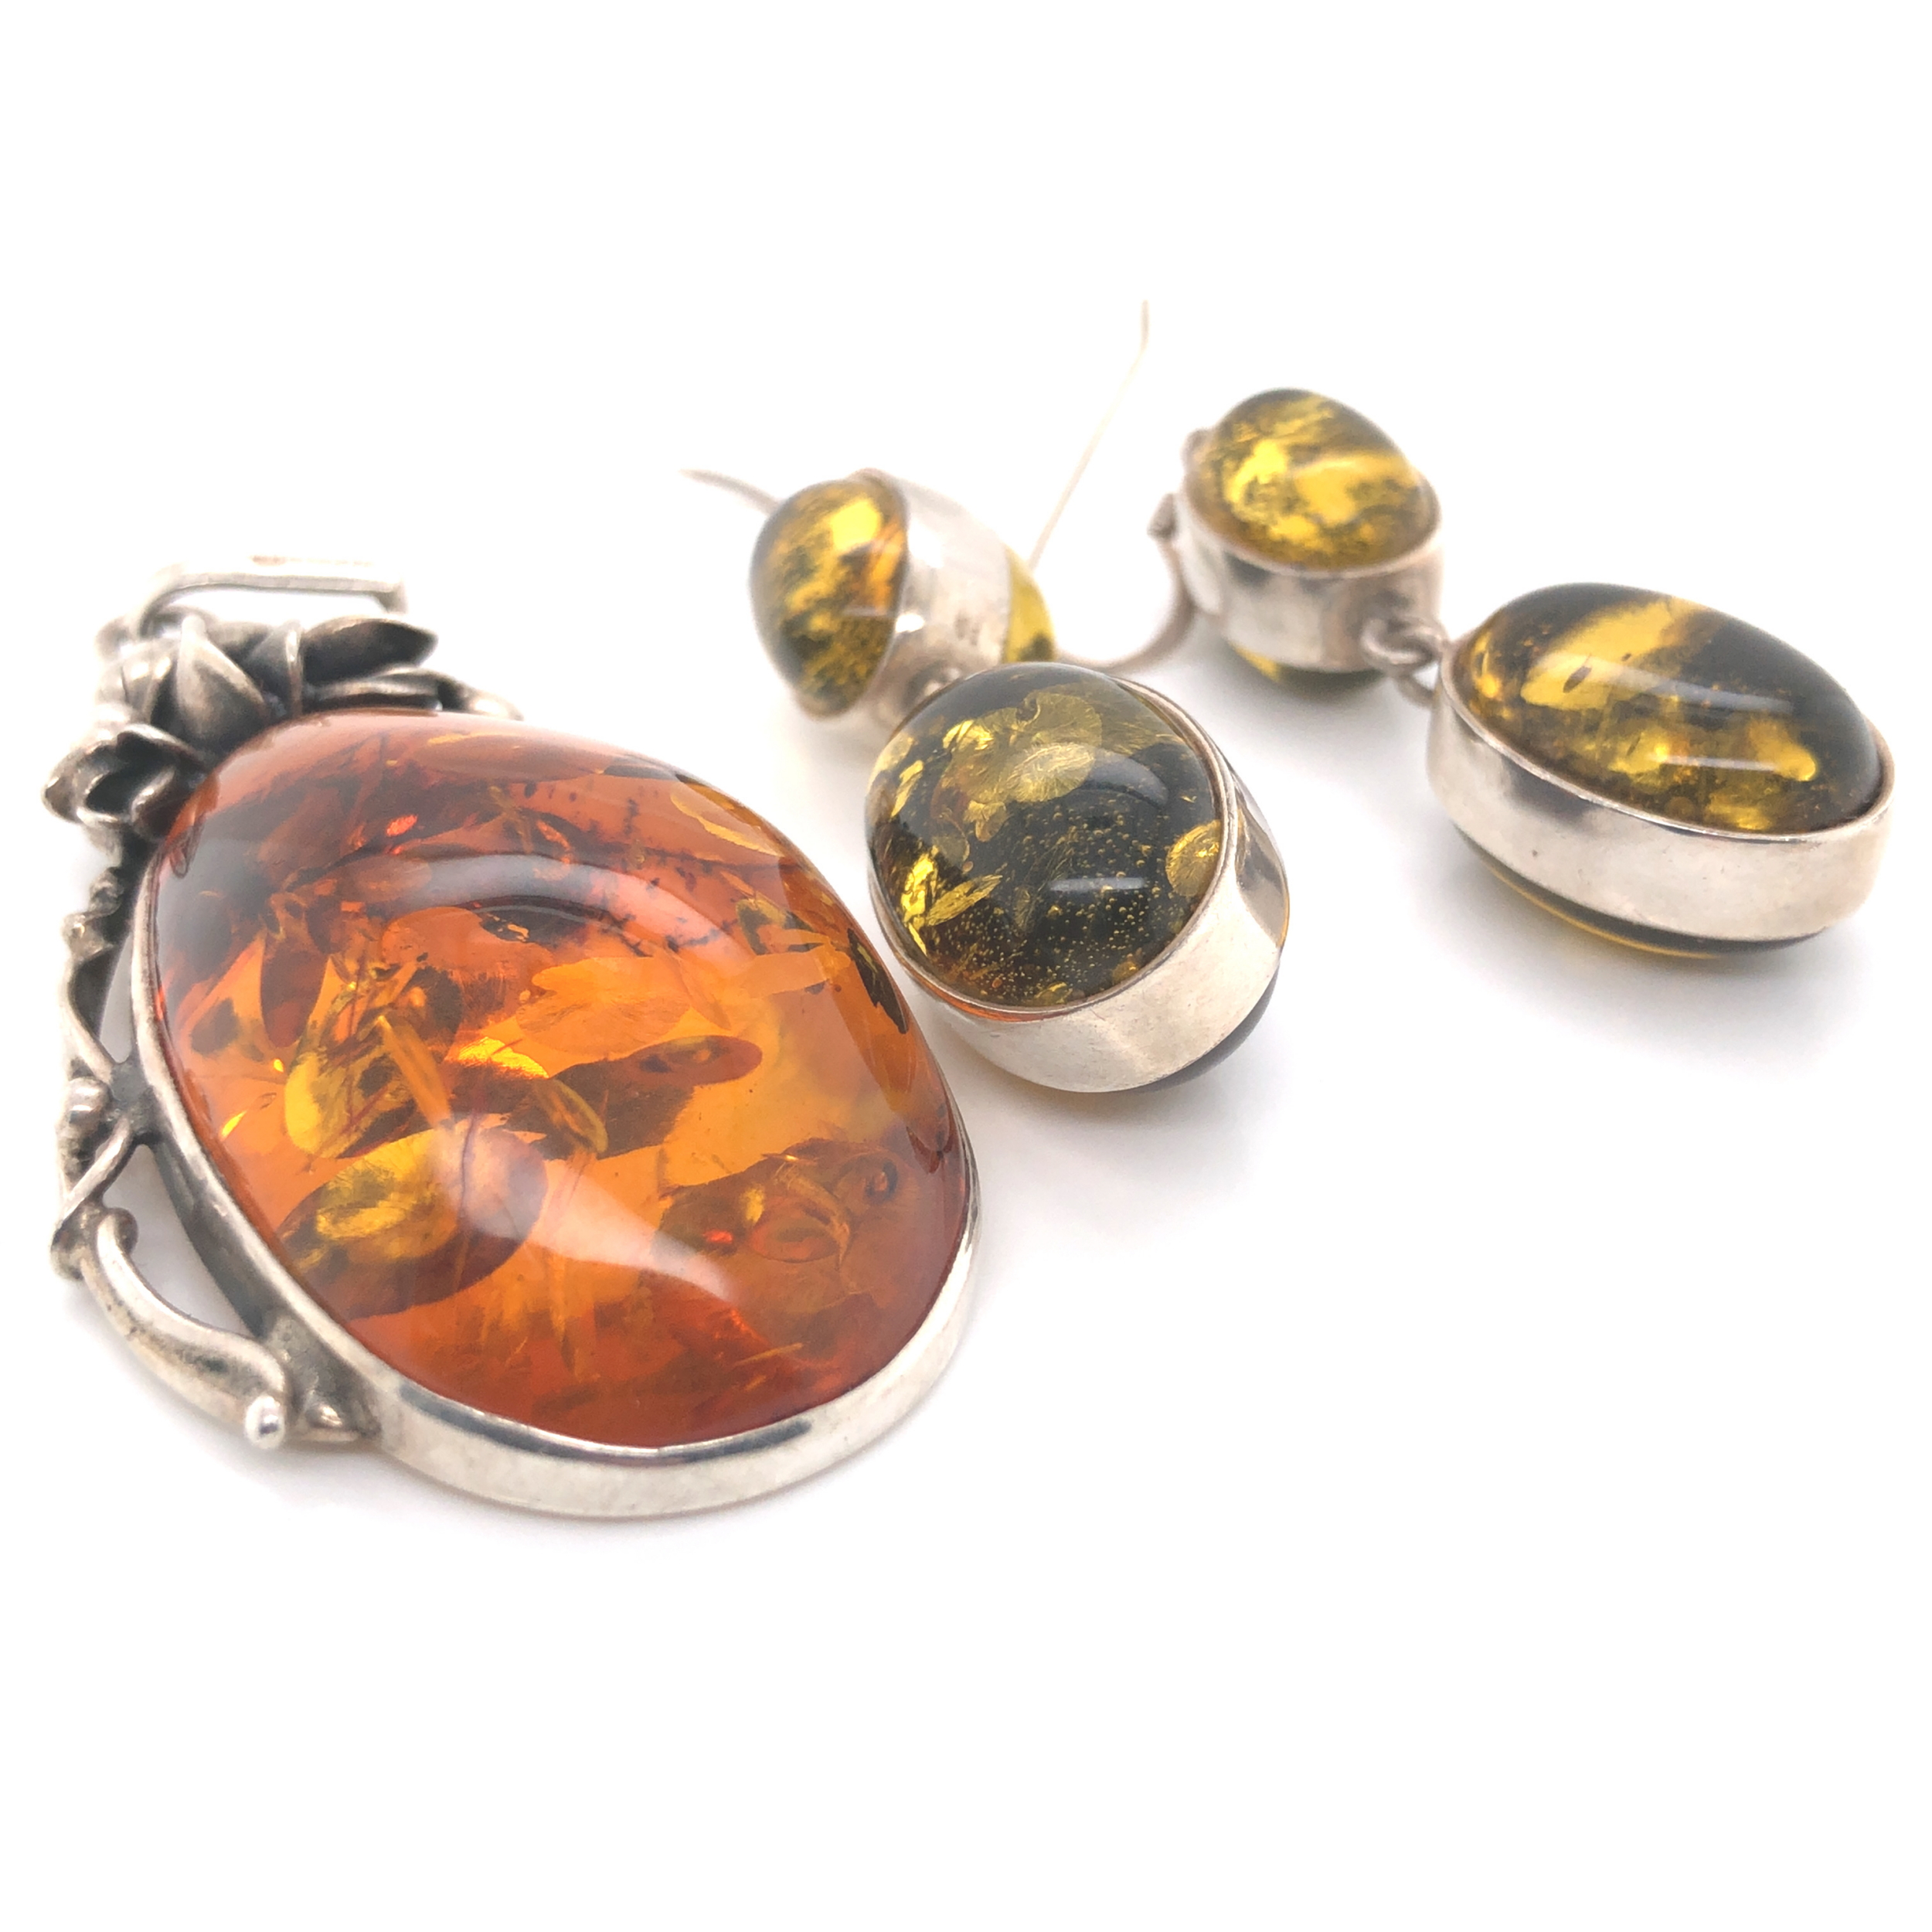 A HALLMARKED SILVER AND AMBER FOLIATE DESIGN DROP PENDANT. LENGTH INCLUDING BAIL 7cms. WEIGHT 17.